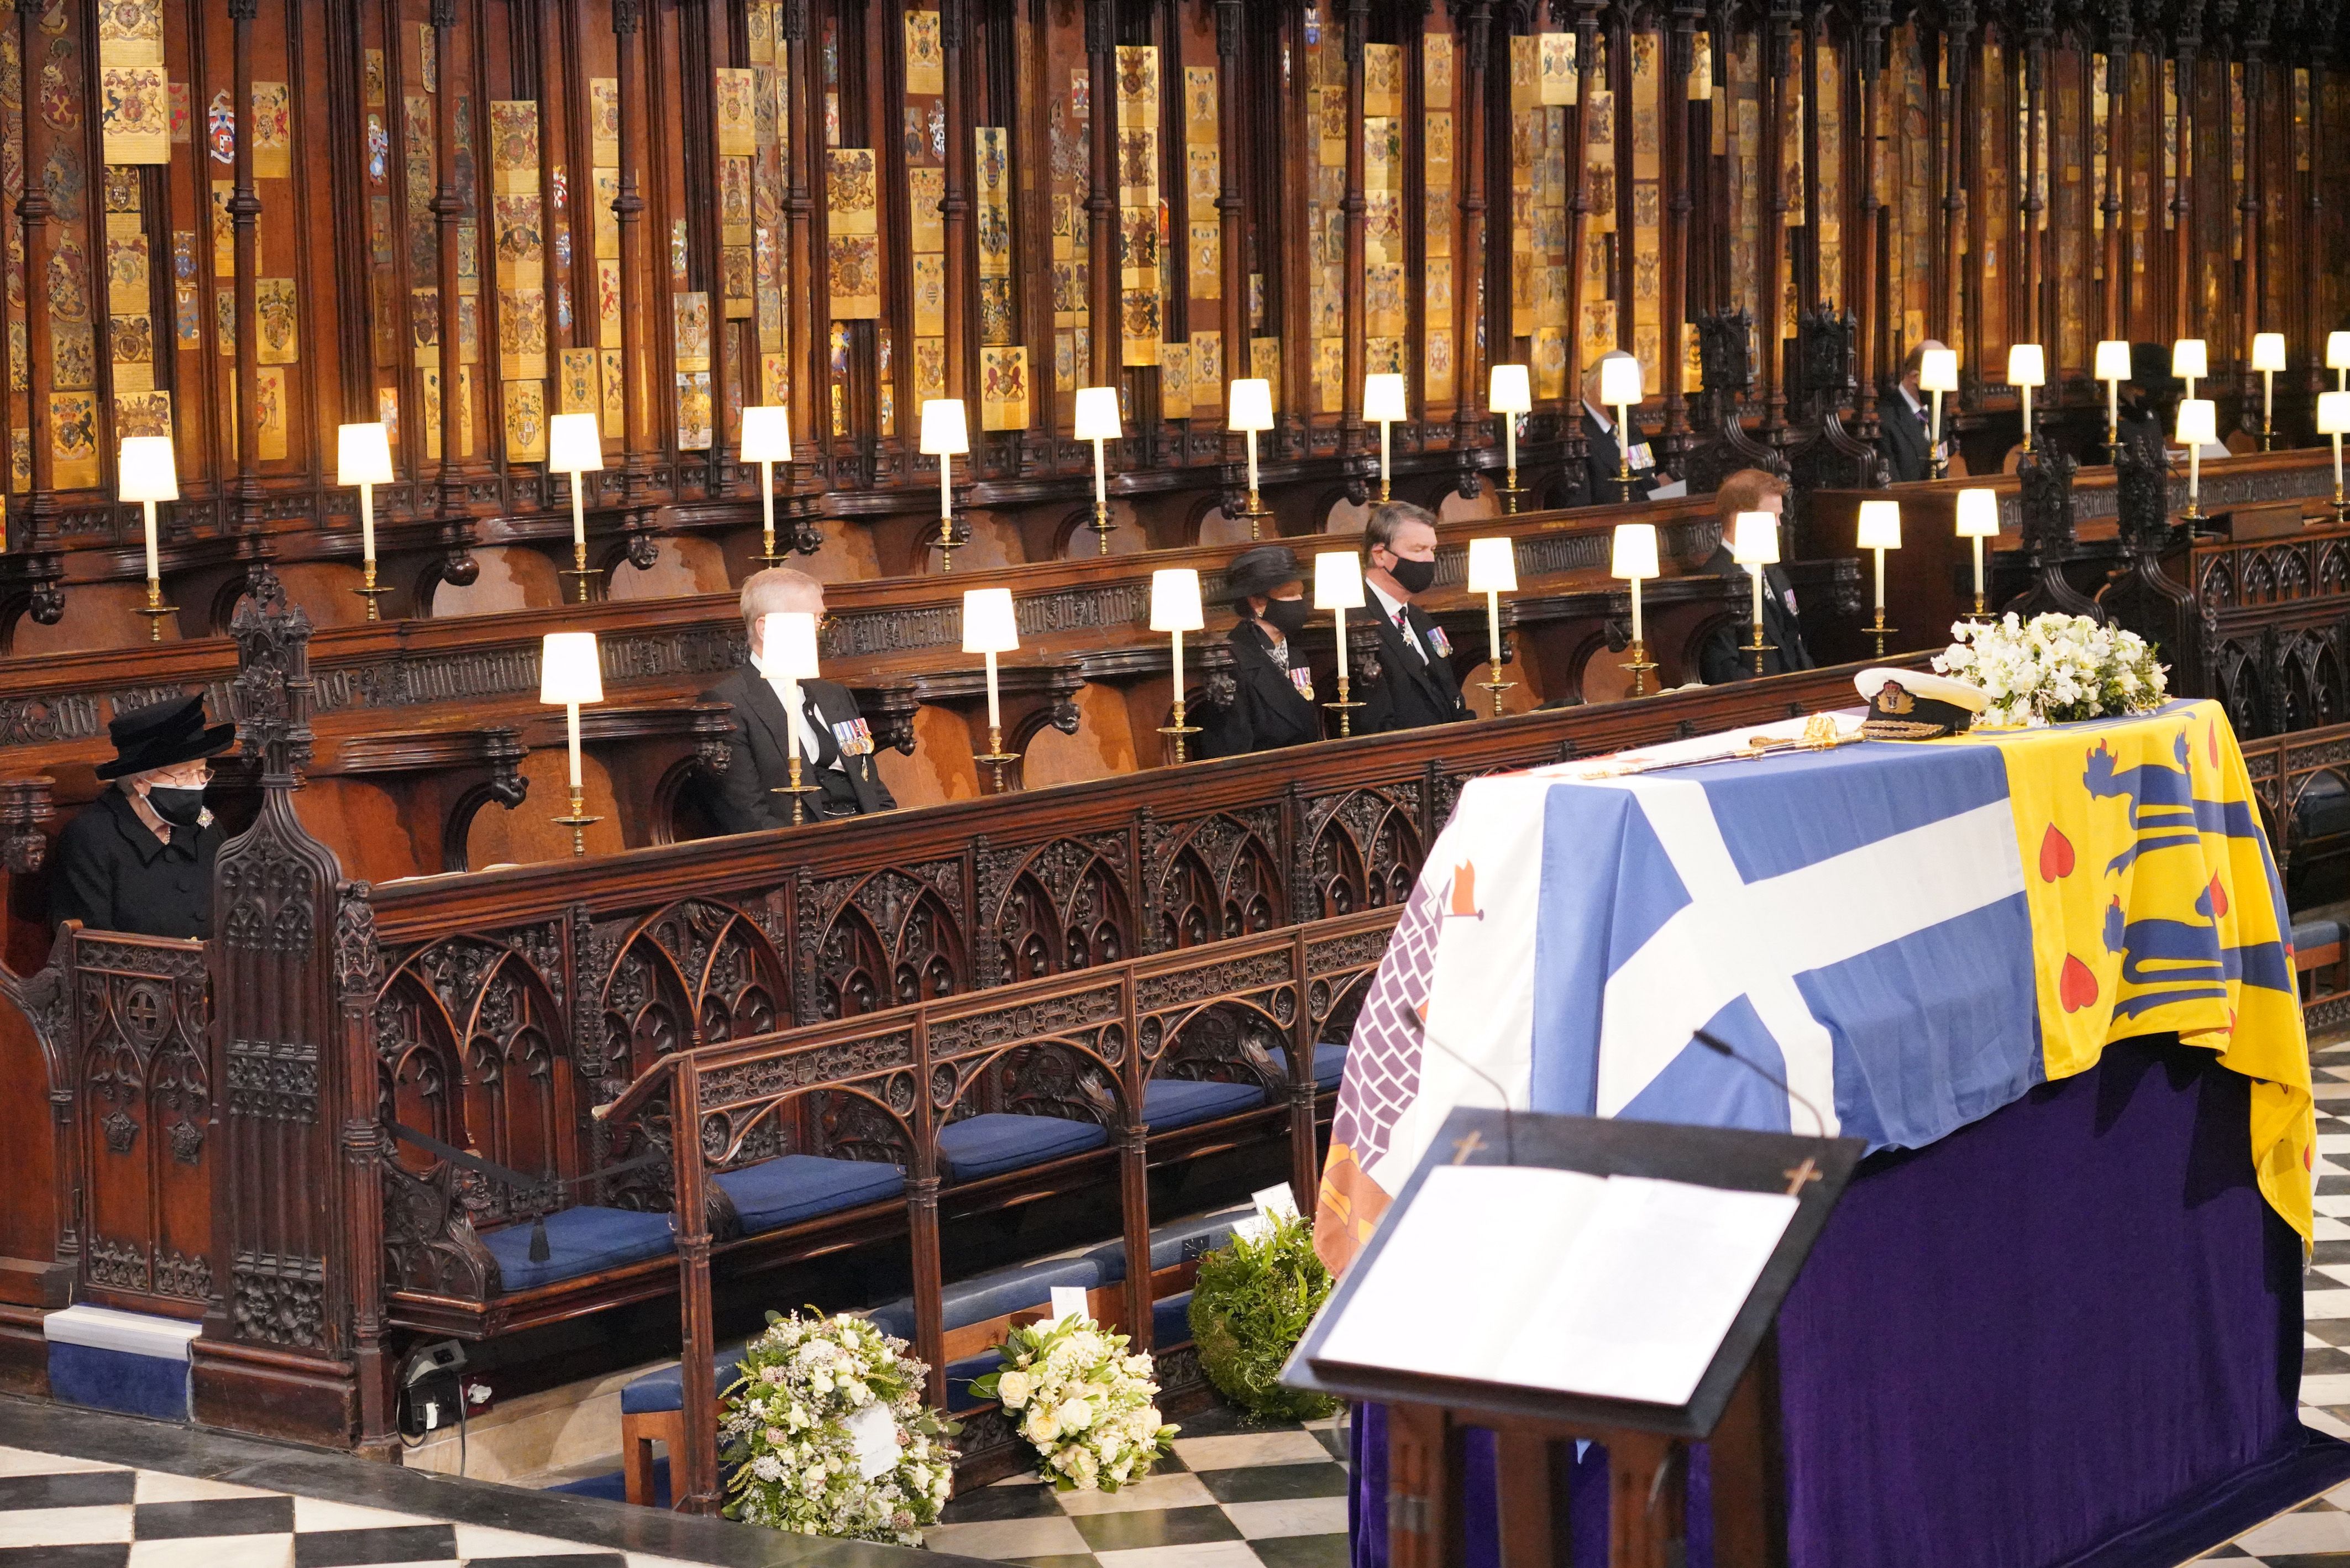 Queen Elizabeth II looks at the coffin of Britain's Prince Philip, Duke of Edinburgh during his funeral service at St George's Chapel in Windsor Castle on 17 April